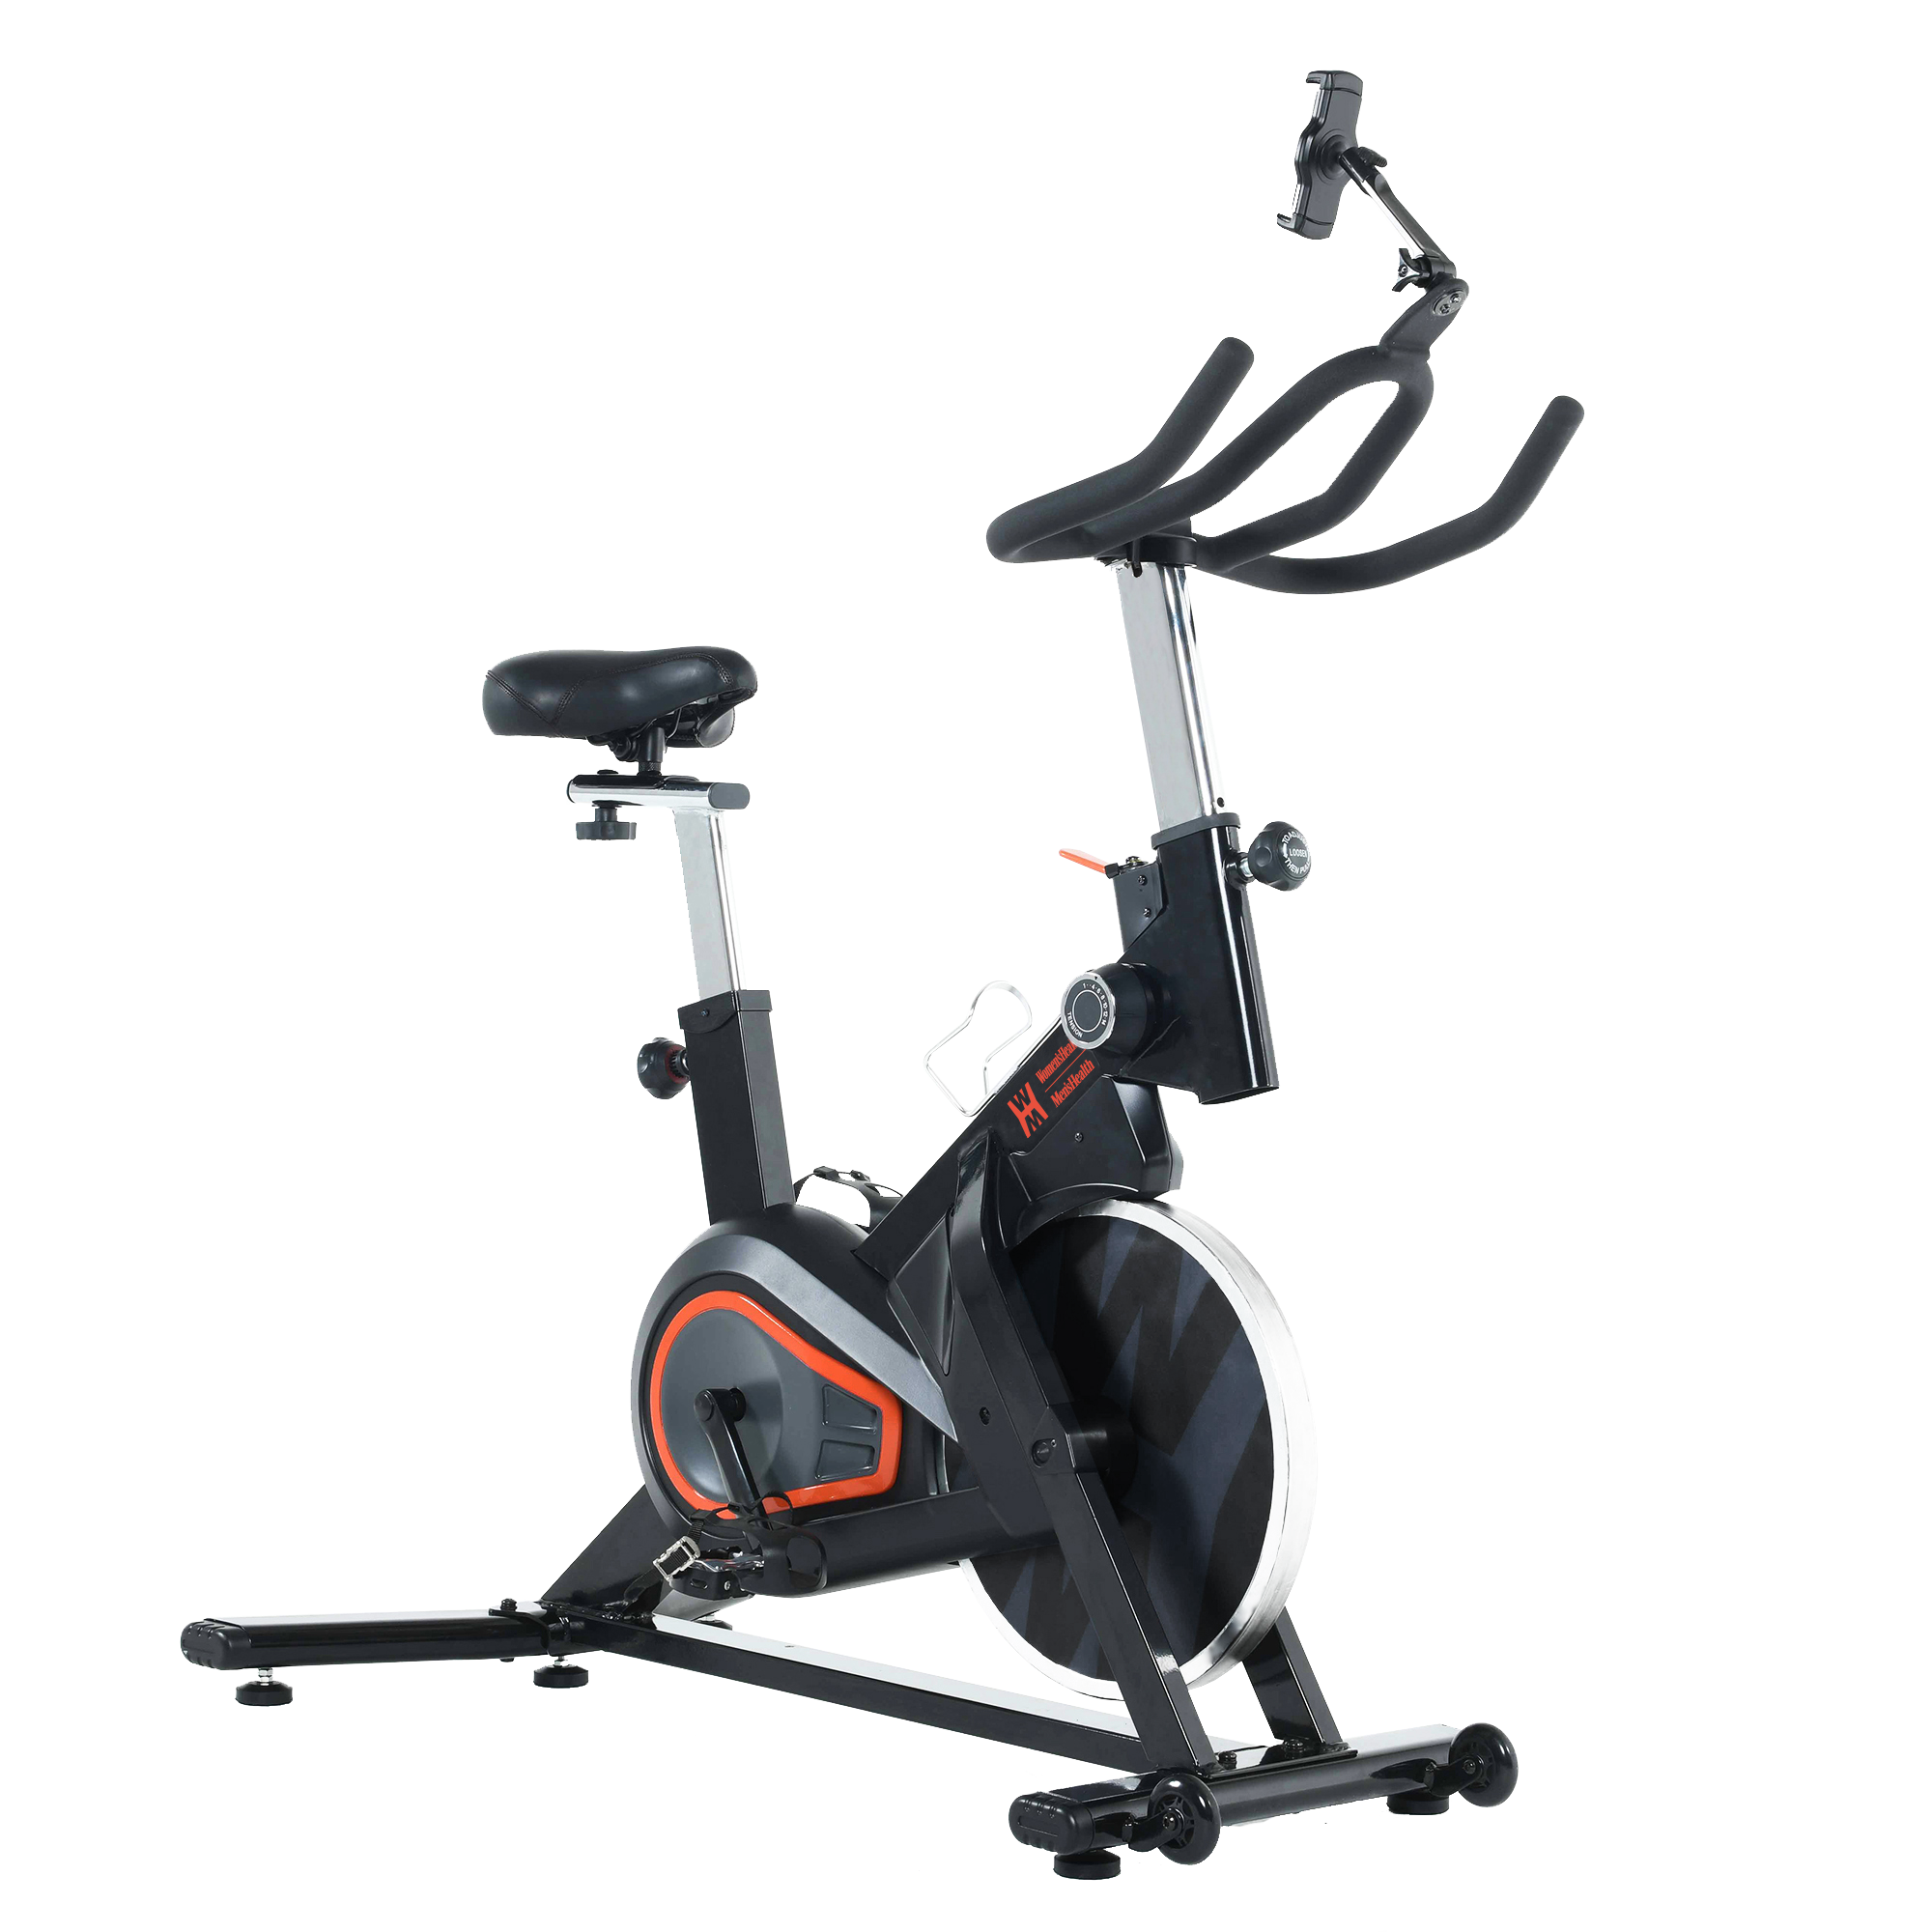 Indoor Exercise Bike Fitness Cardio Workout Machine Home Gym Training Bicycle A+ 